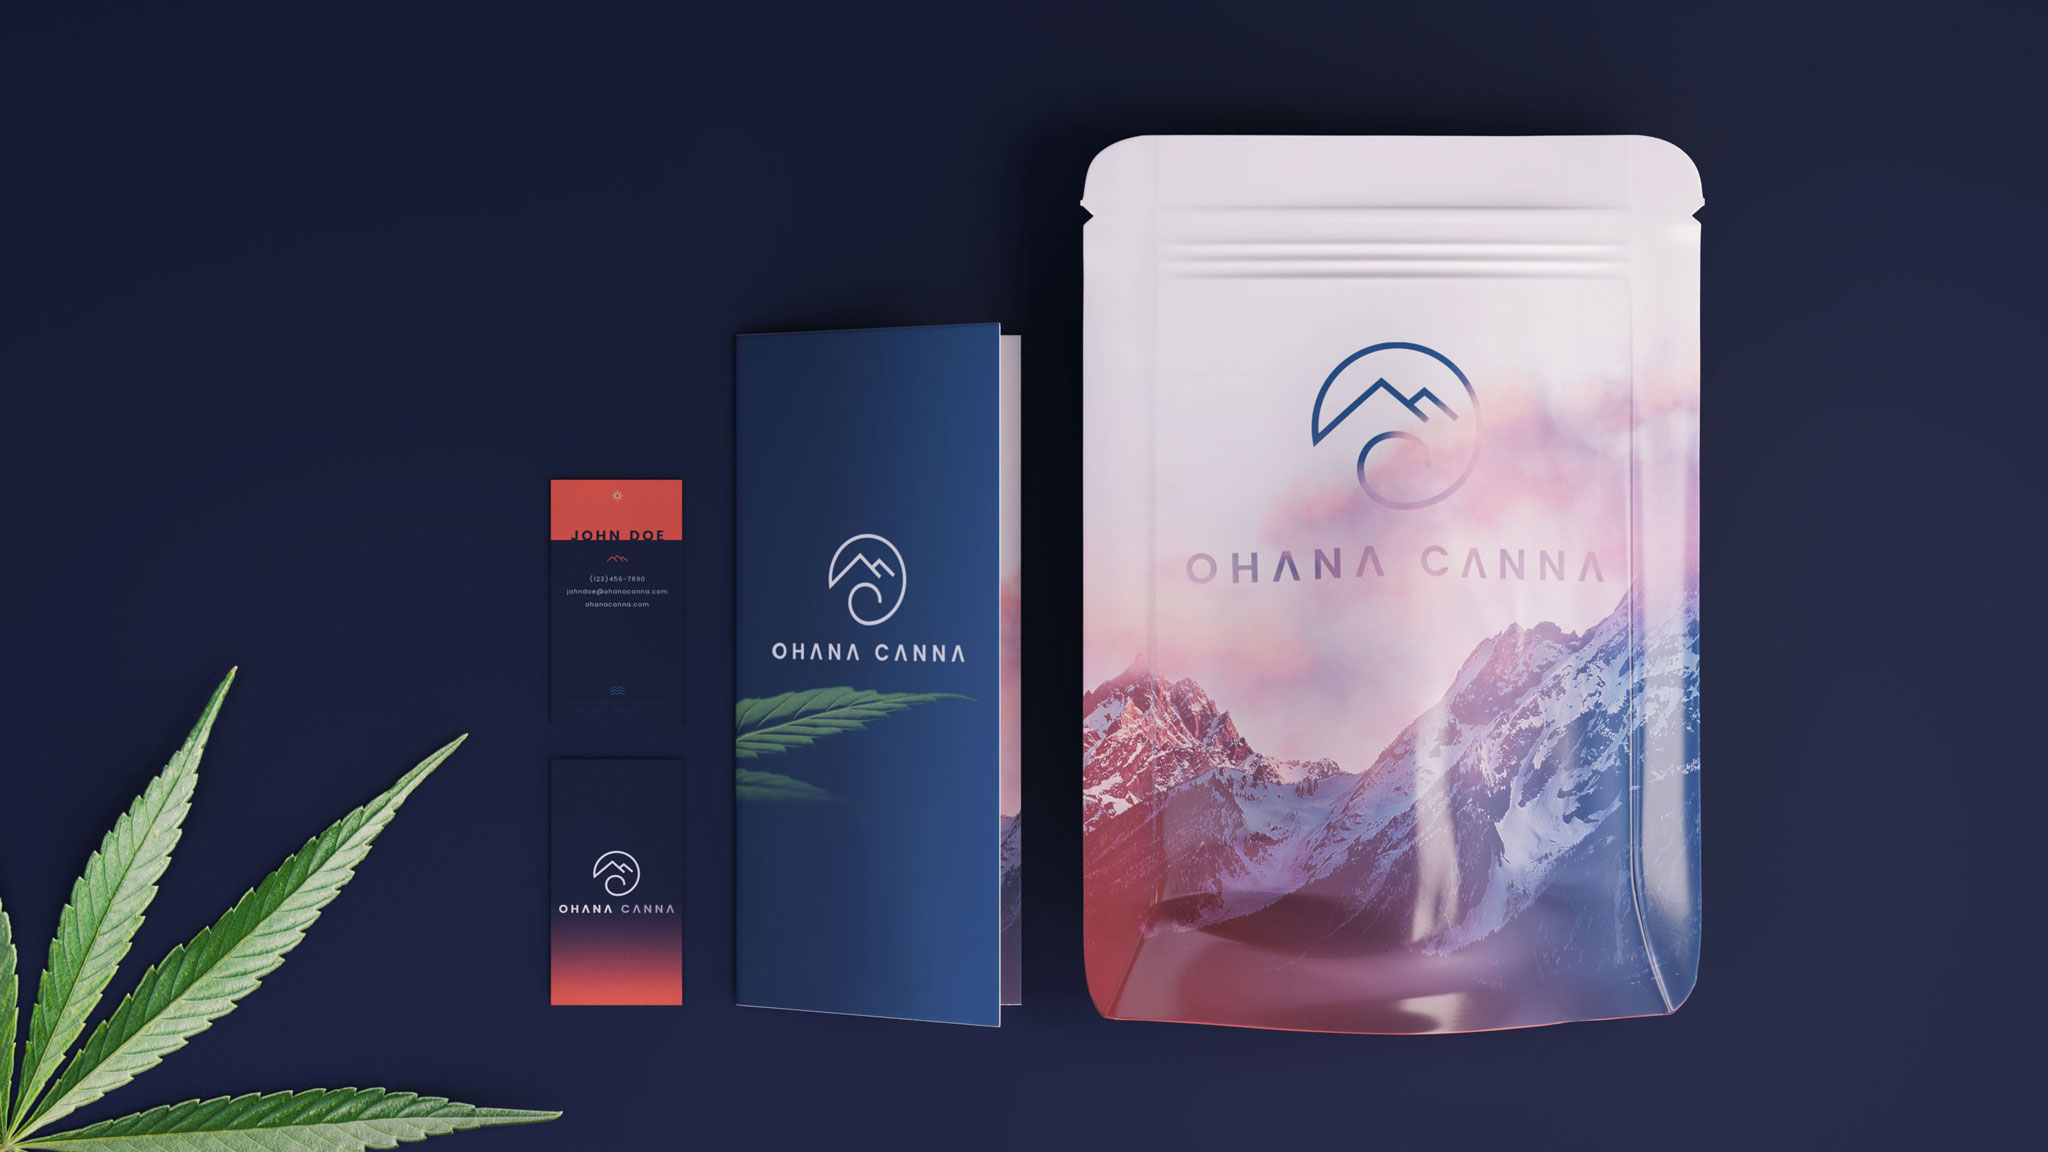 Cannabis branding applied to Exit bag design and print materials for Ohana Canna